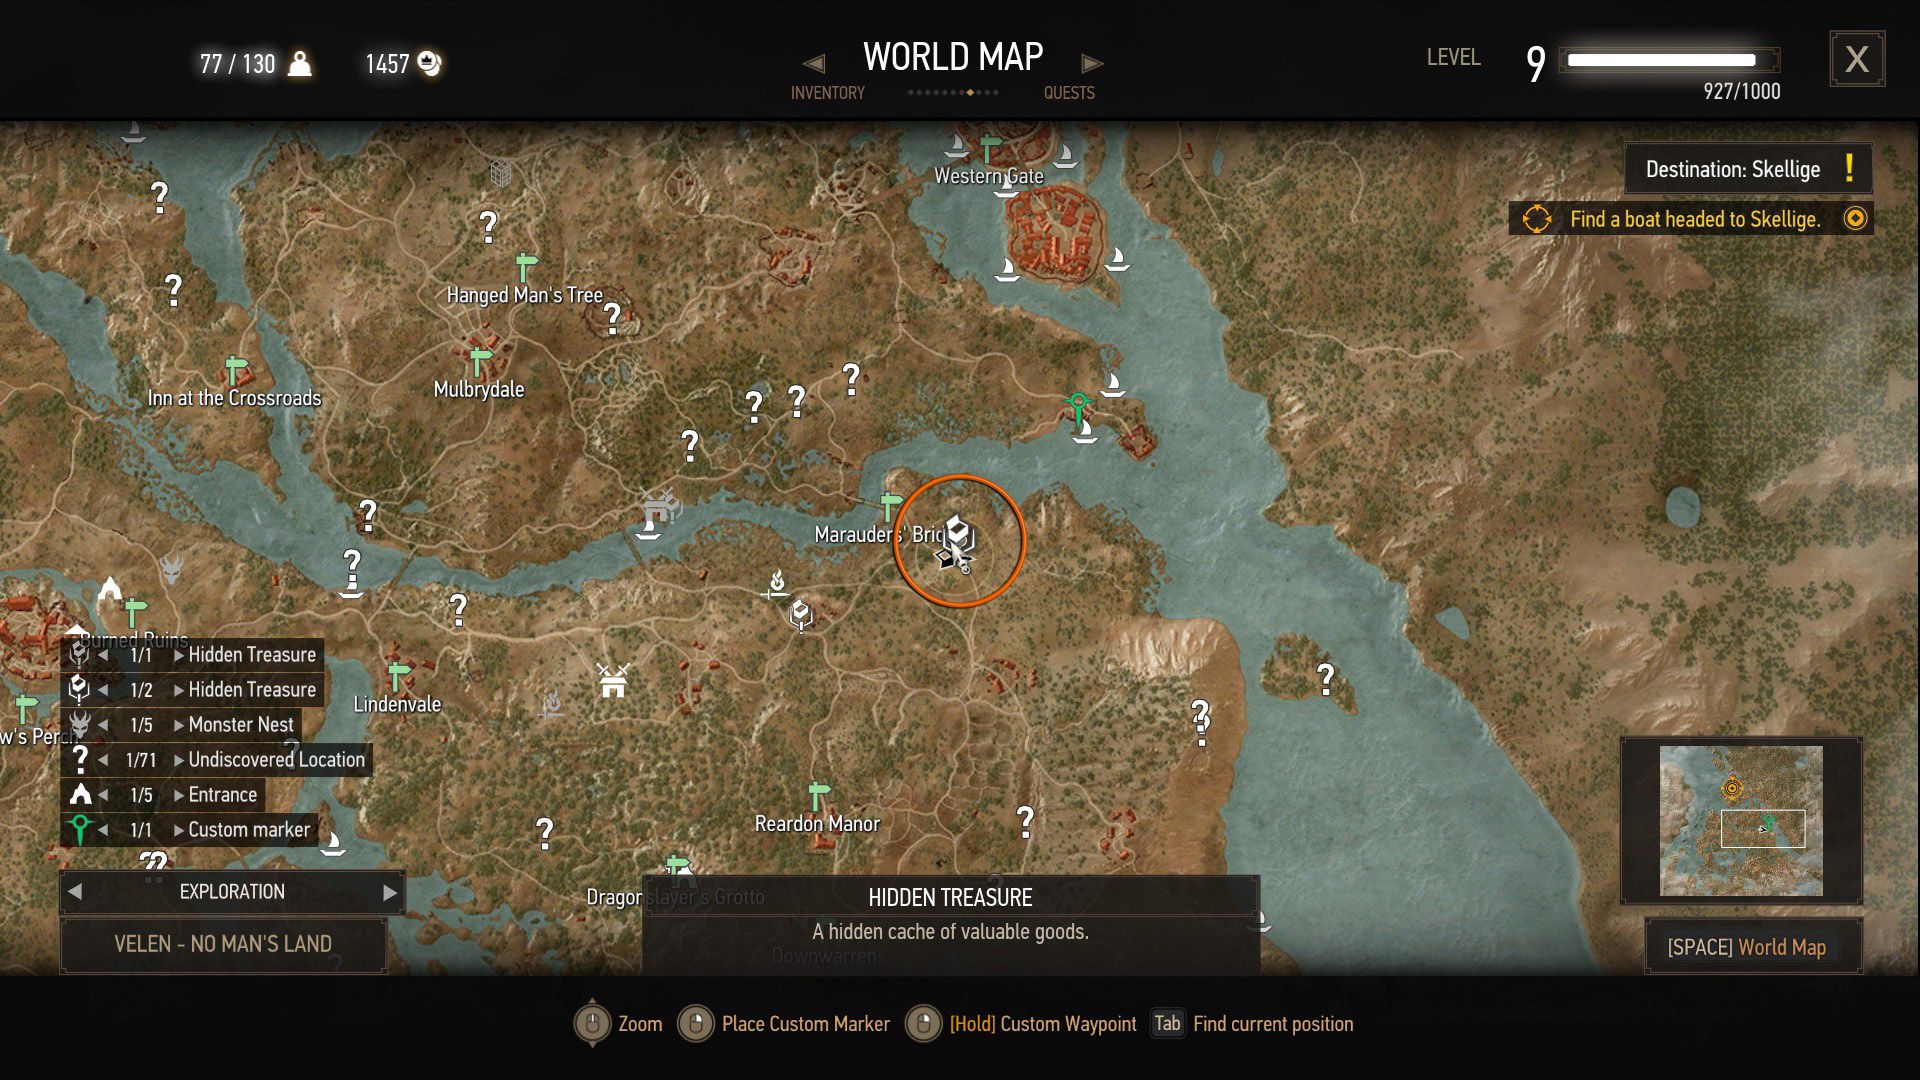 The witcher 3 witcher gear locations фото 11